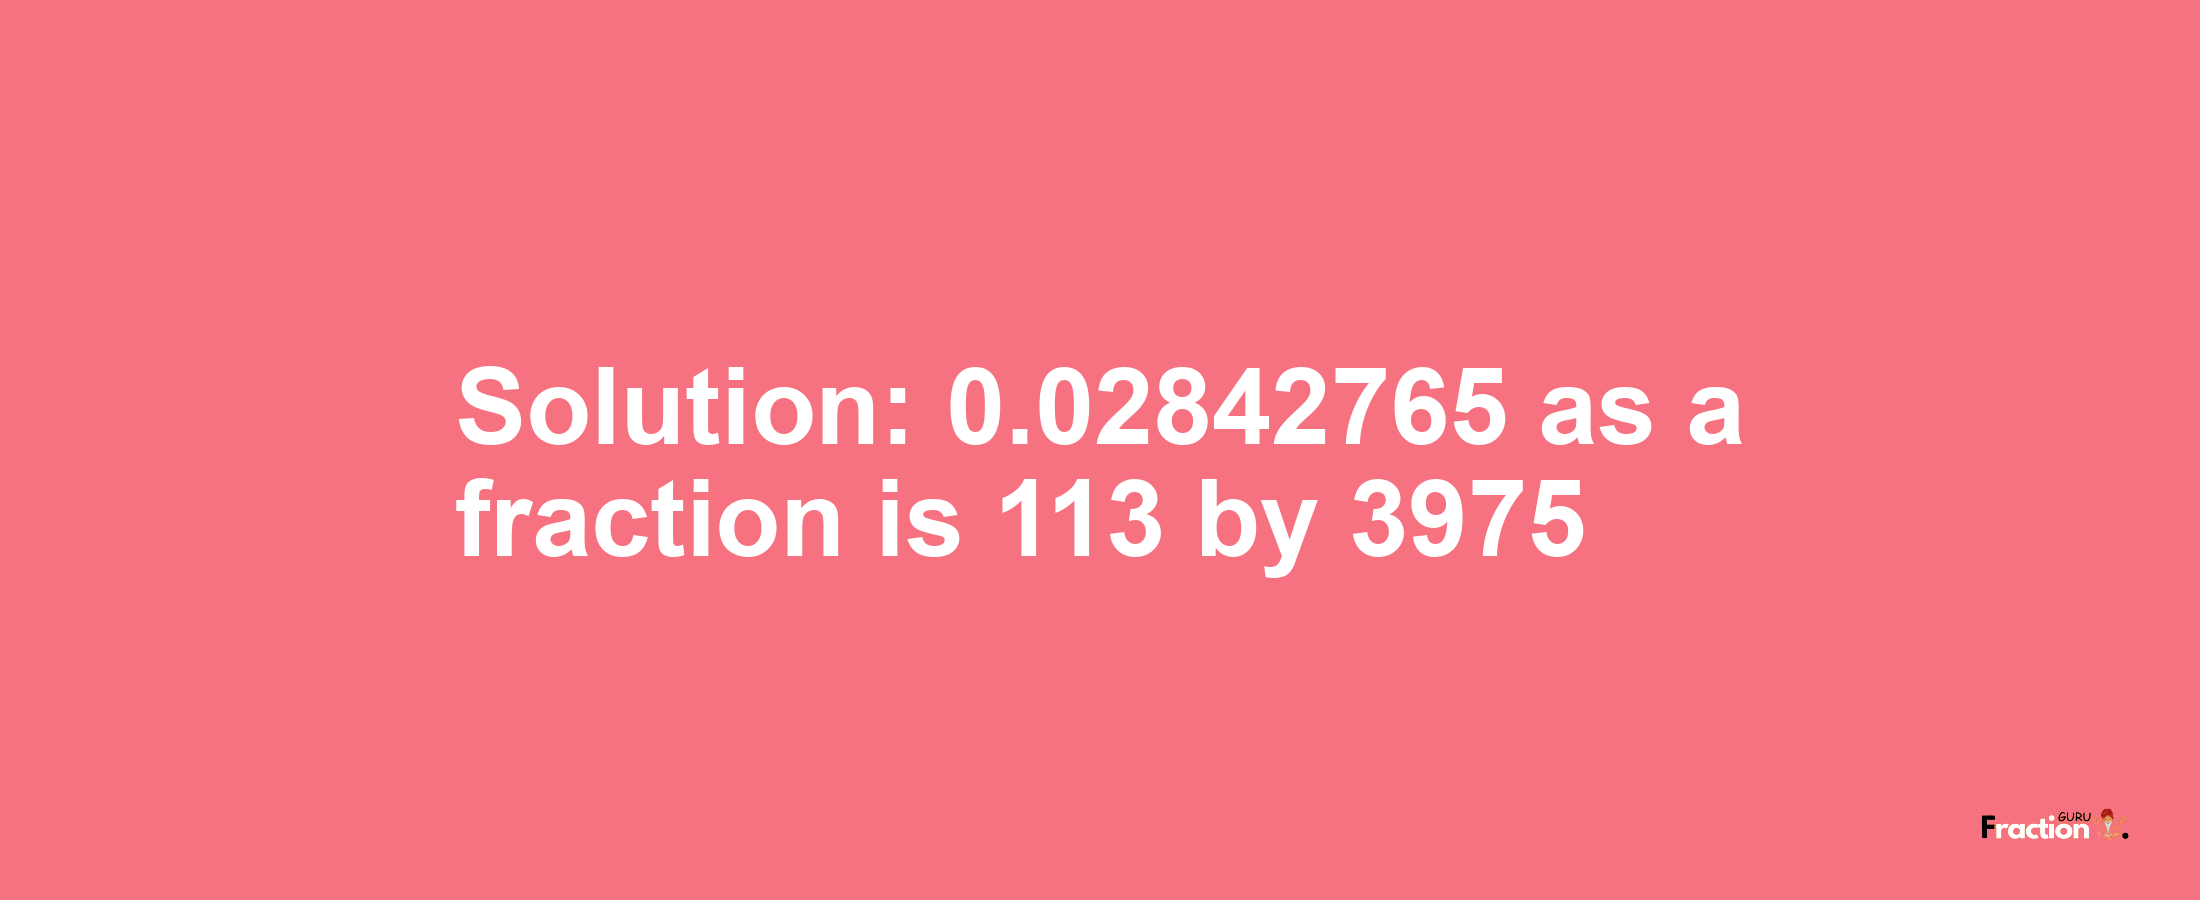 Solution:0.02842765 as a fraction is 113/3975